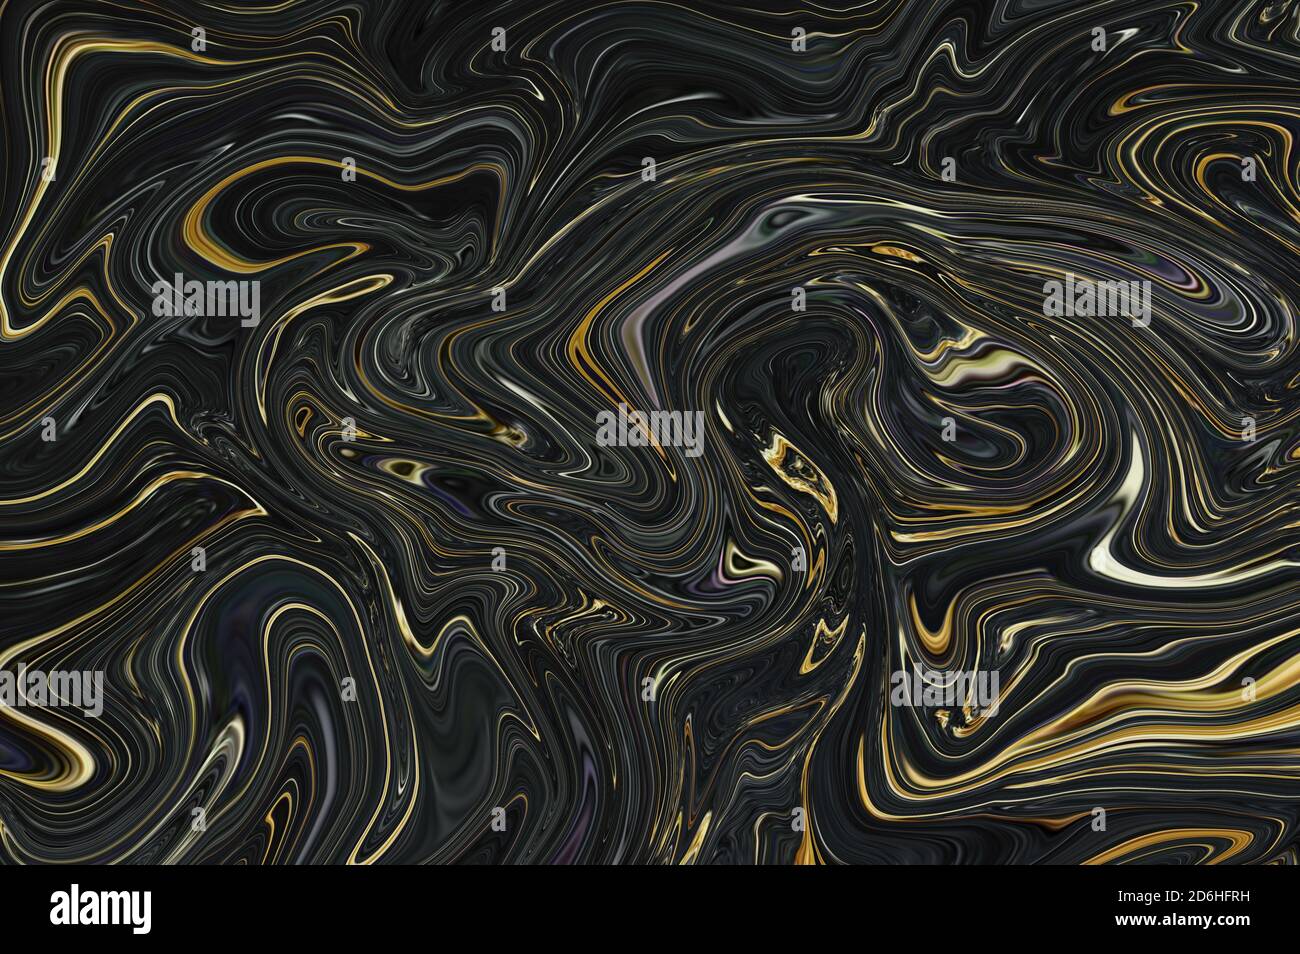 Gold black liquid paint marbling wallpaper with golden gloss fluid waves background texture Stock Photo